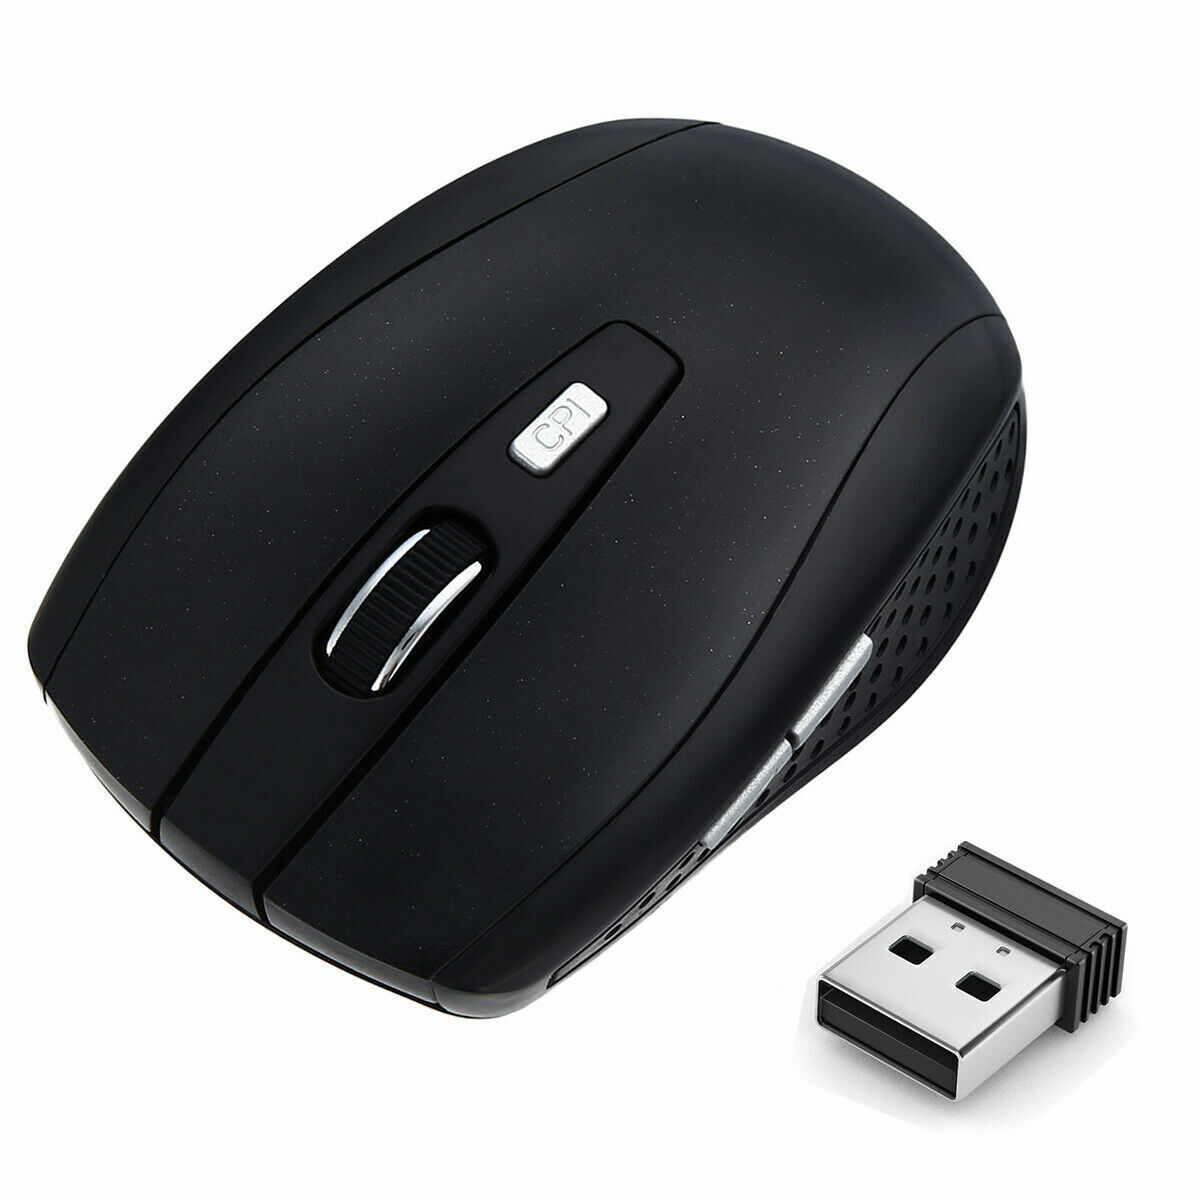 2.4GHz Wireless Optical Gaming Mouse Cordless Mice + USB Receiver for PC Laptop